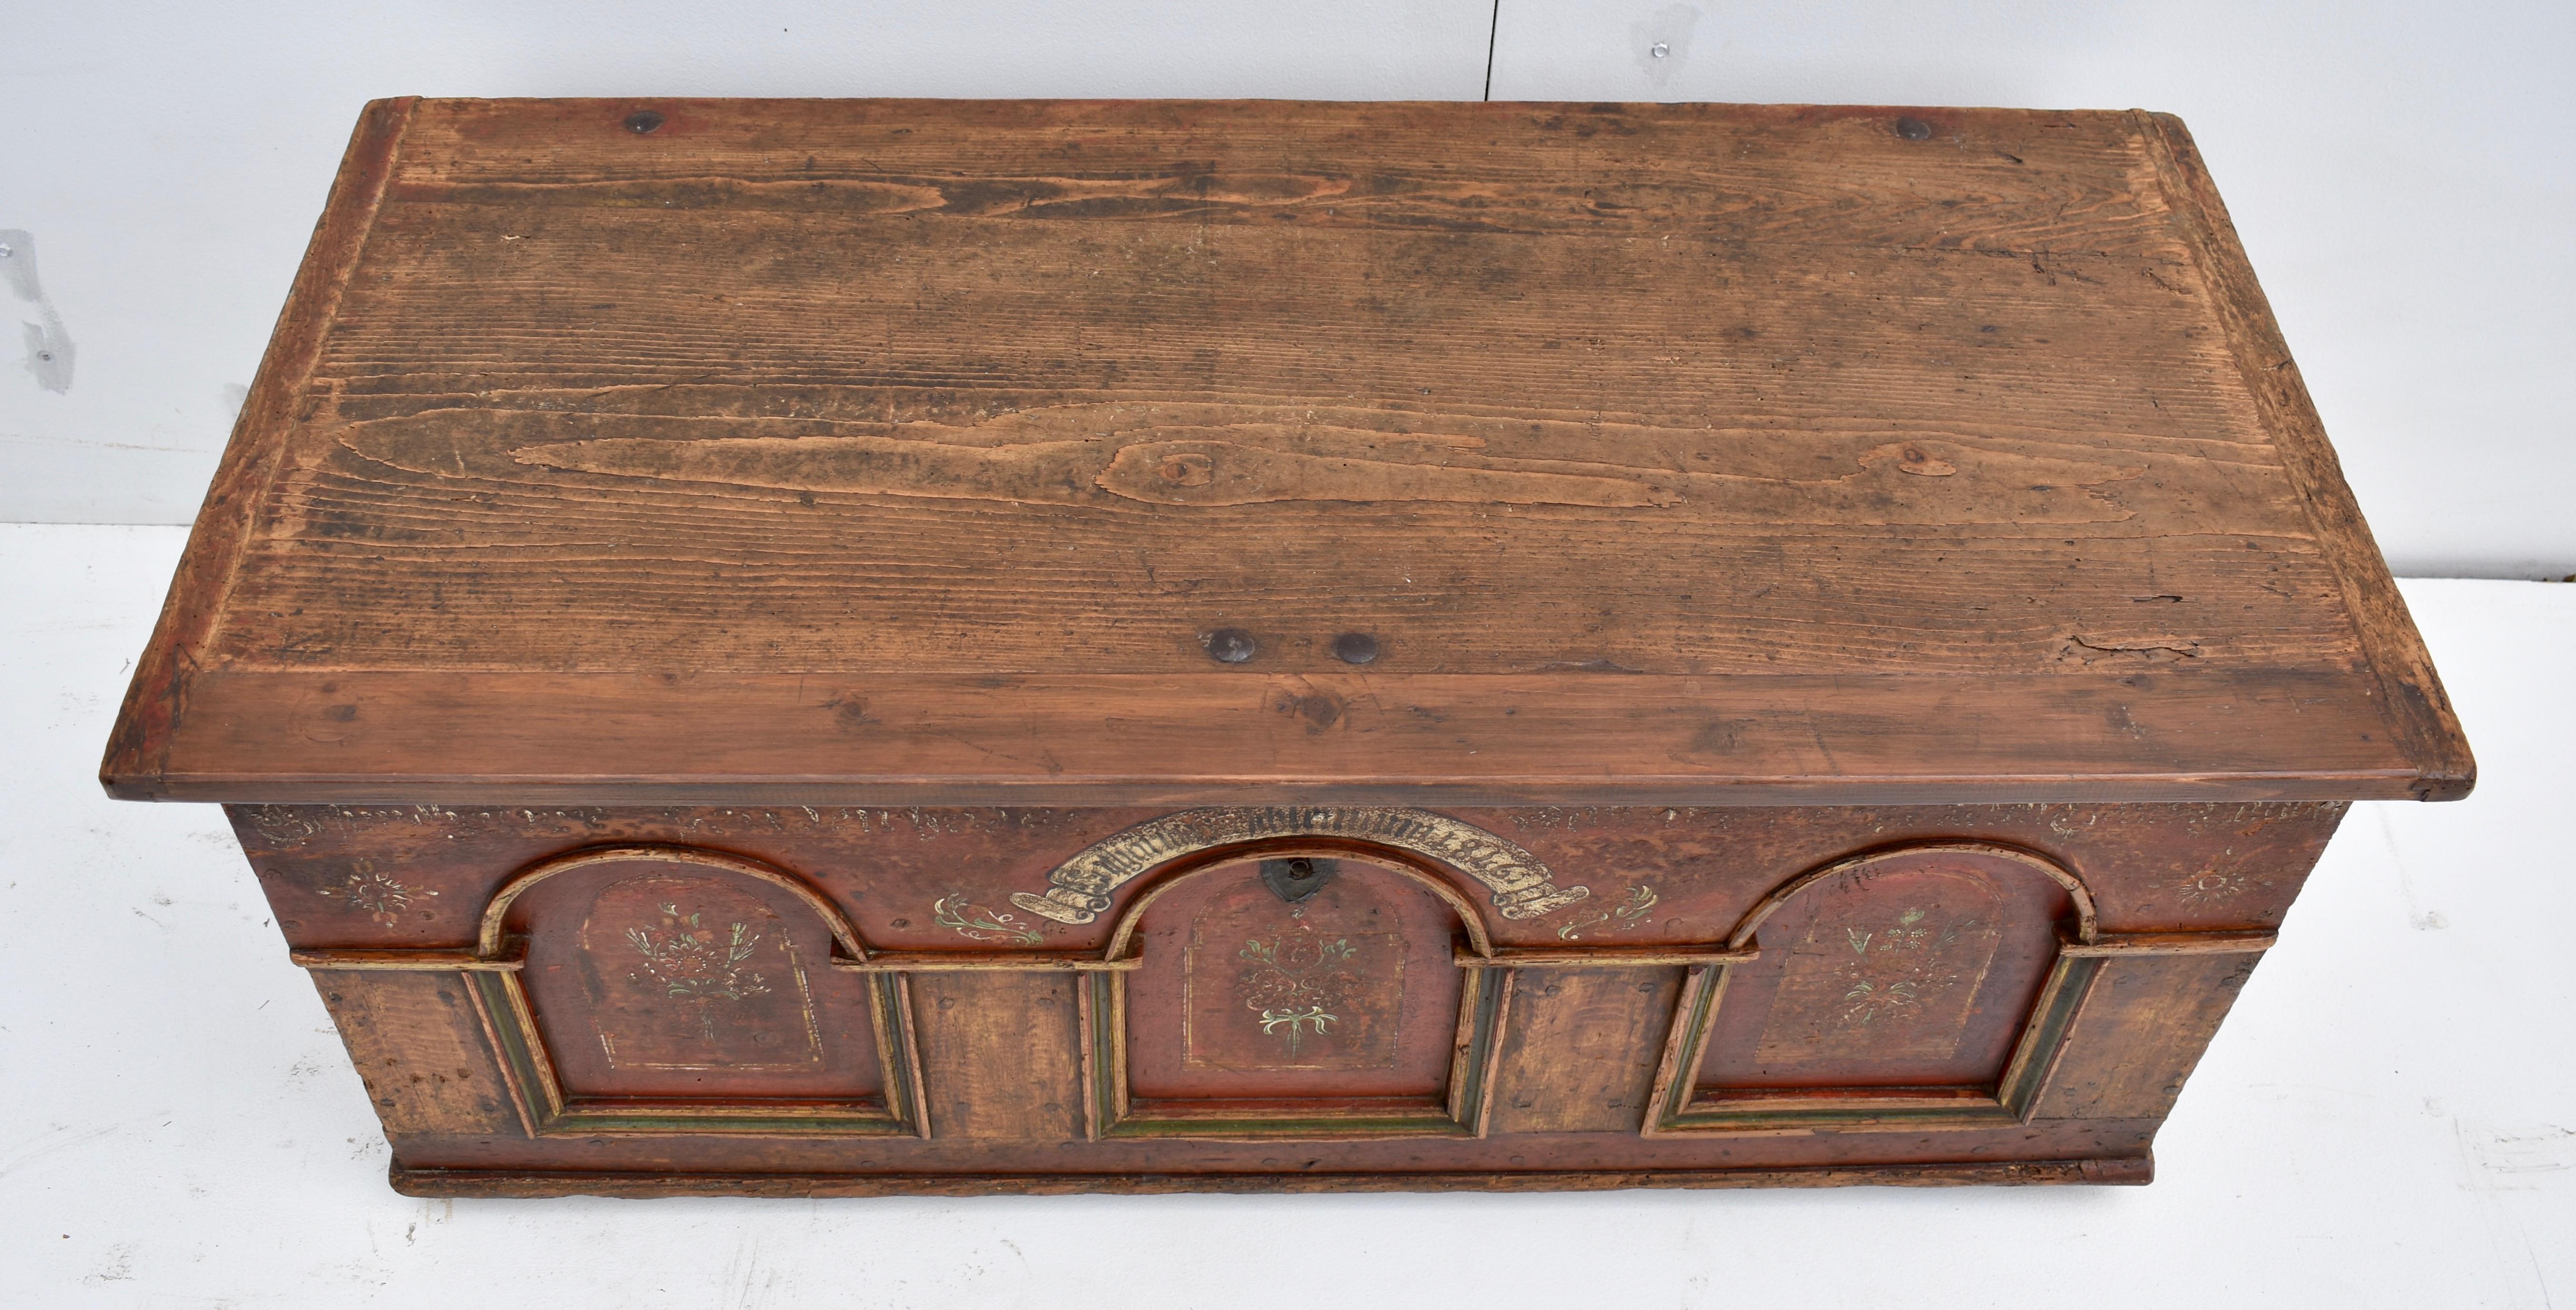 19th Century Pine Trunk or Blanket Chest in Original Decorative Paint, Dated 1846